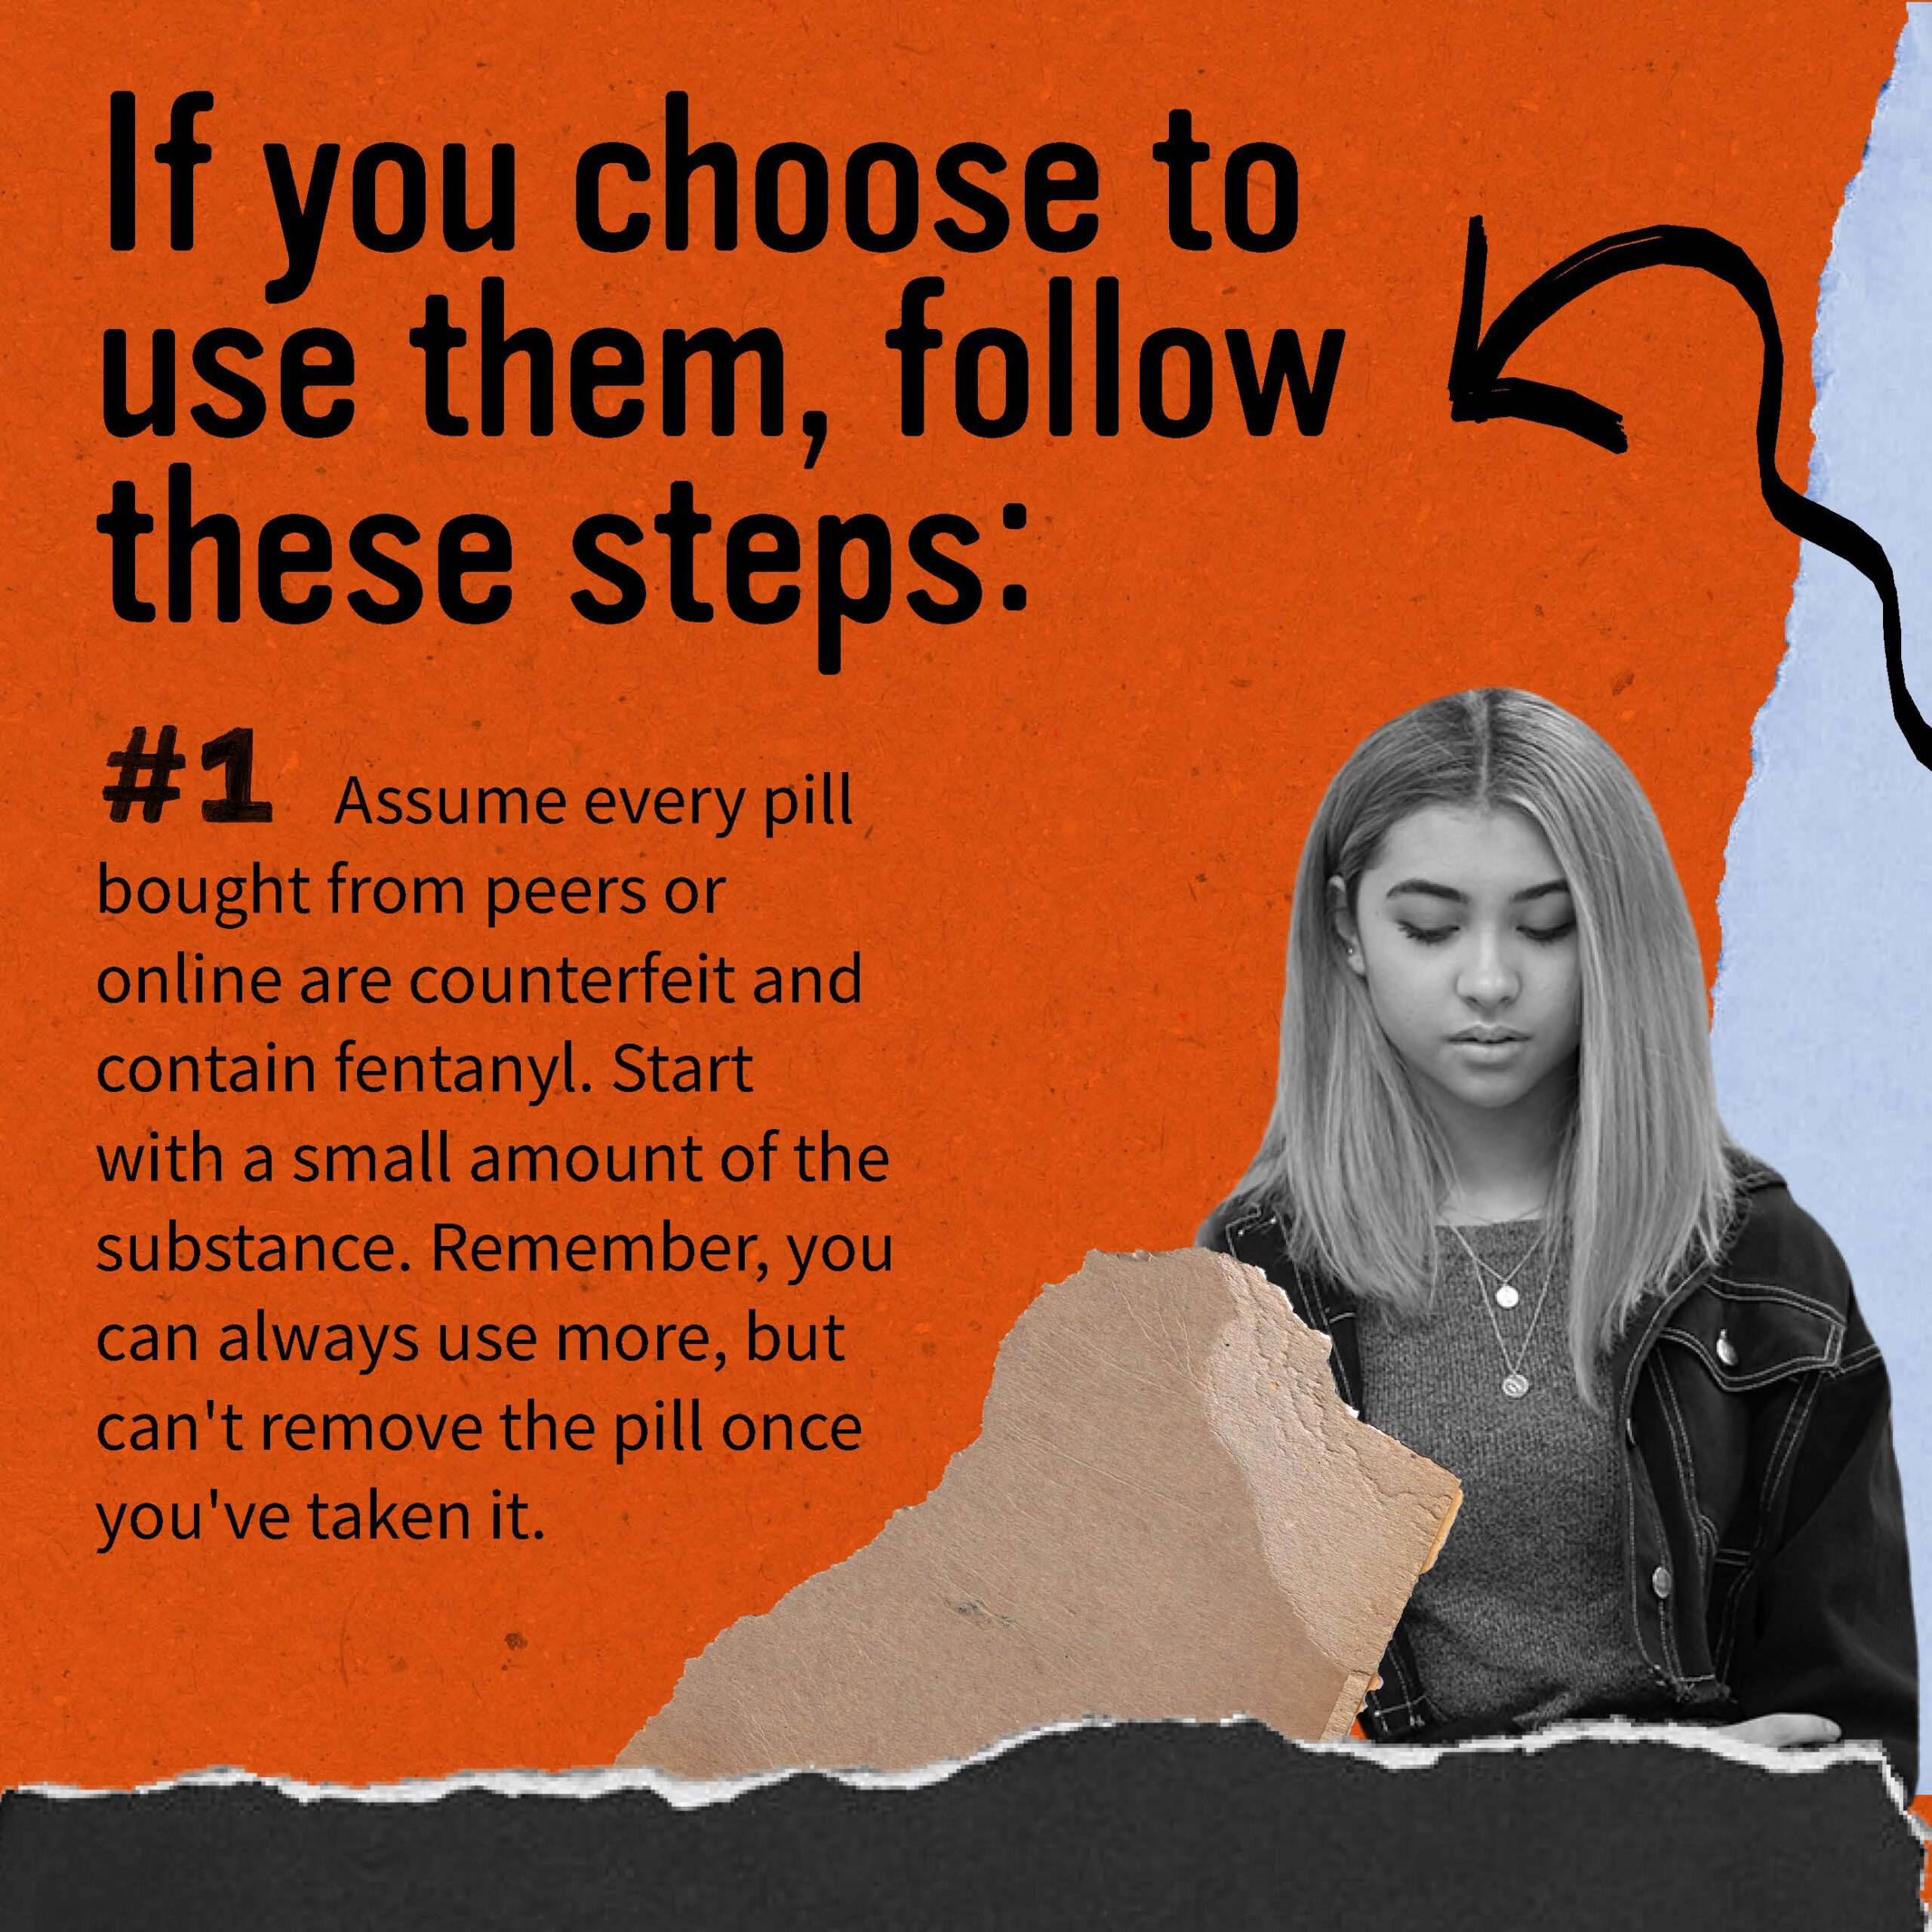 If you choose to use drugs, follow safety steps